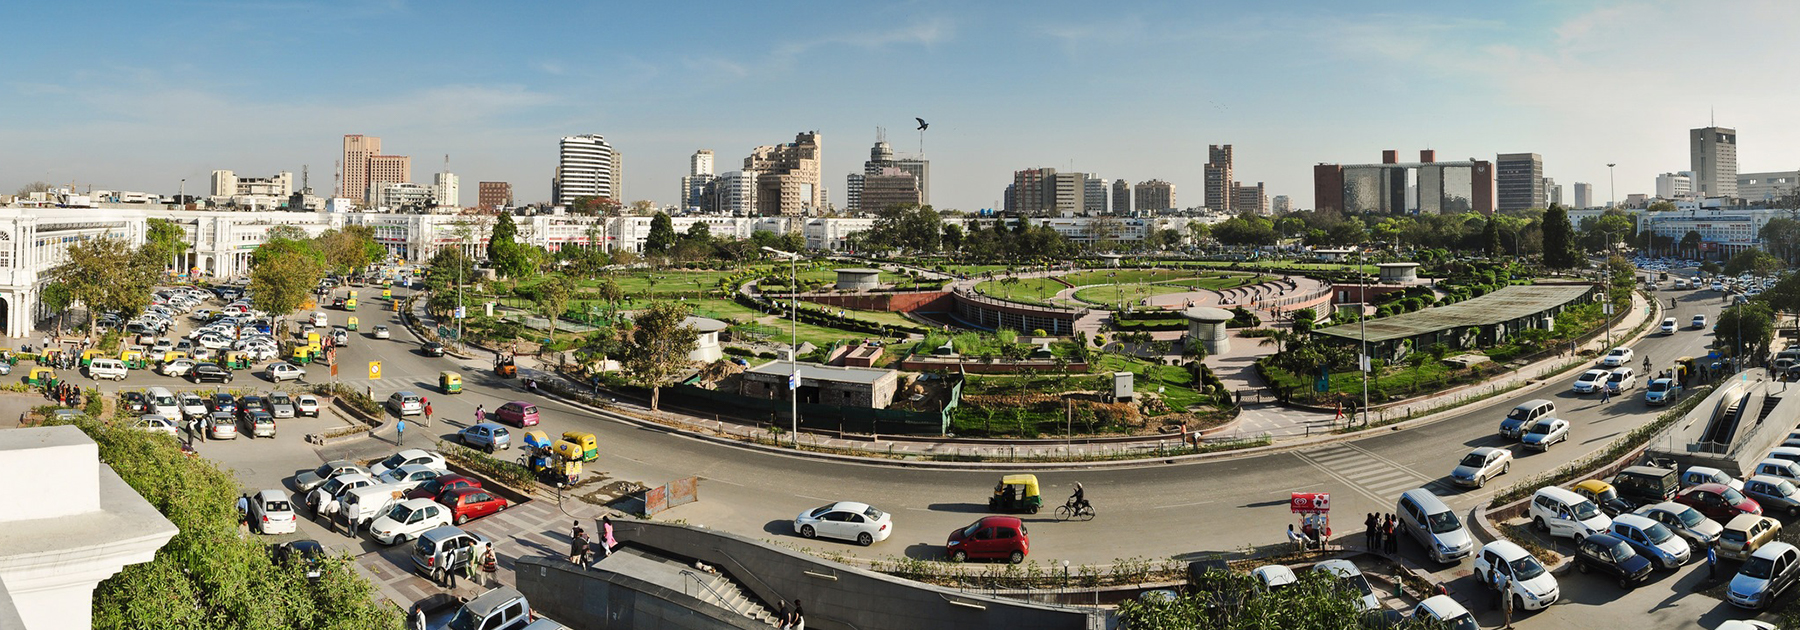 Panoramic view of inner circle and central park in Connaught Place, New Delhi. (Kabi1990, licensed under CC BY-SA 3.0)